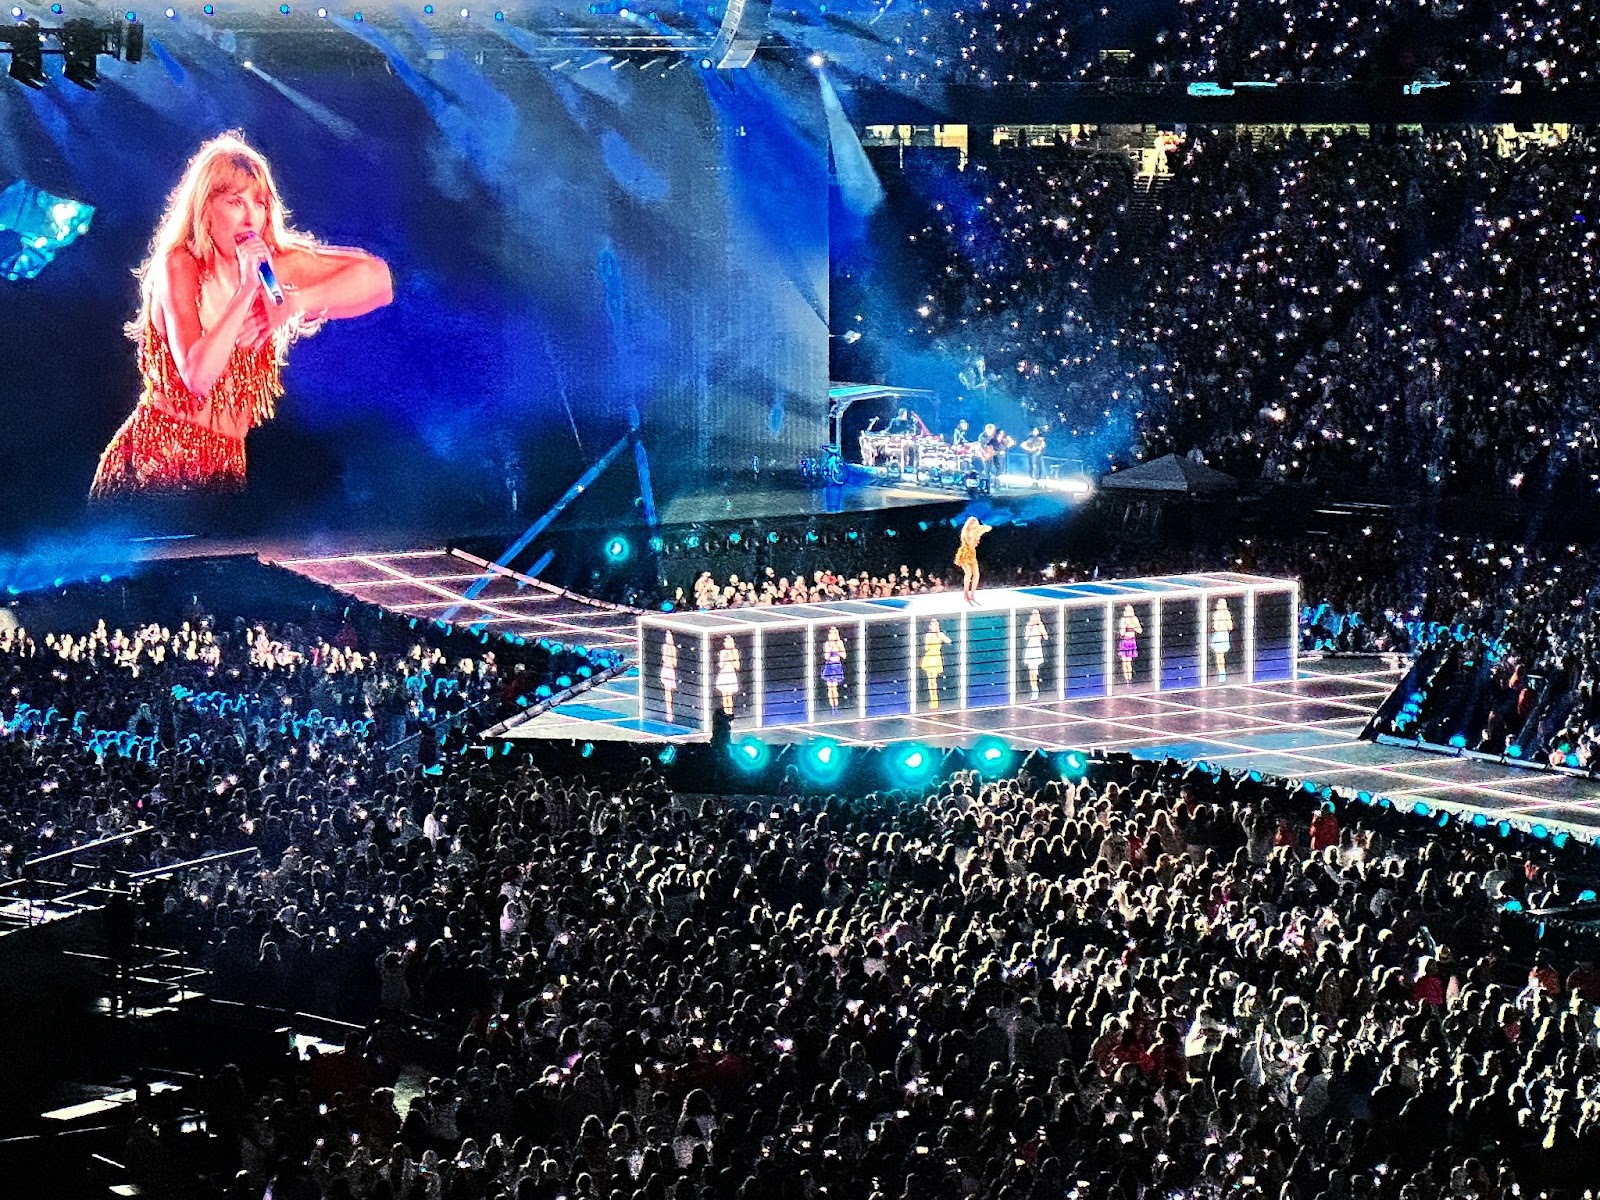 A crowd of people watching Taylor Swift perform on a stage at her The Eras Tour concert